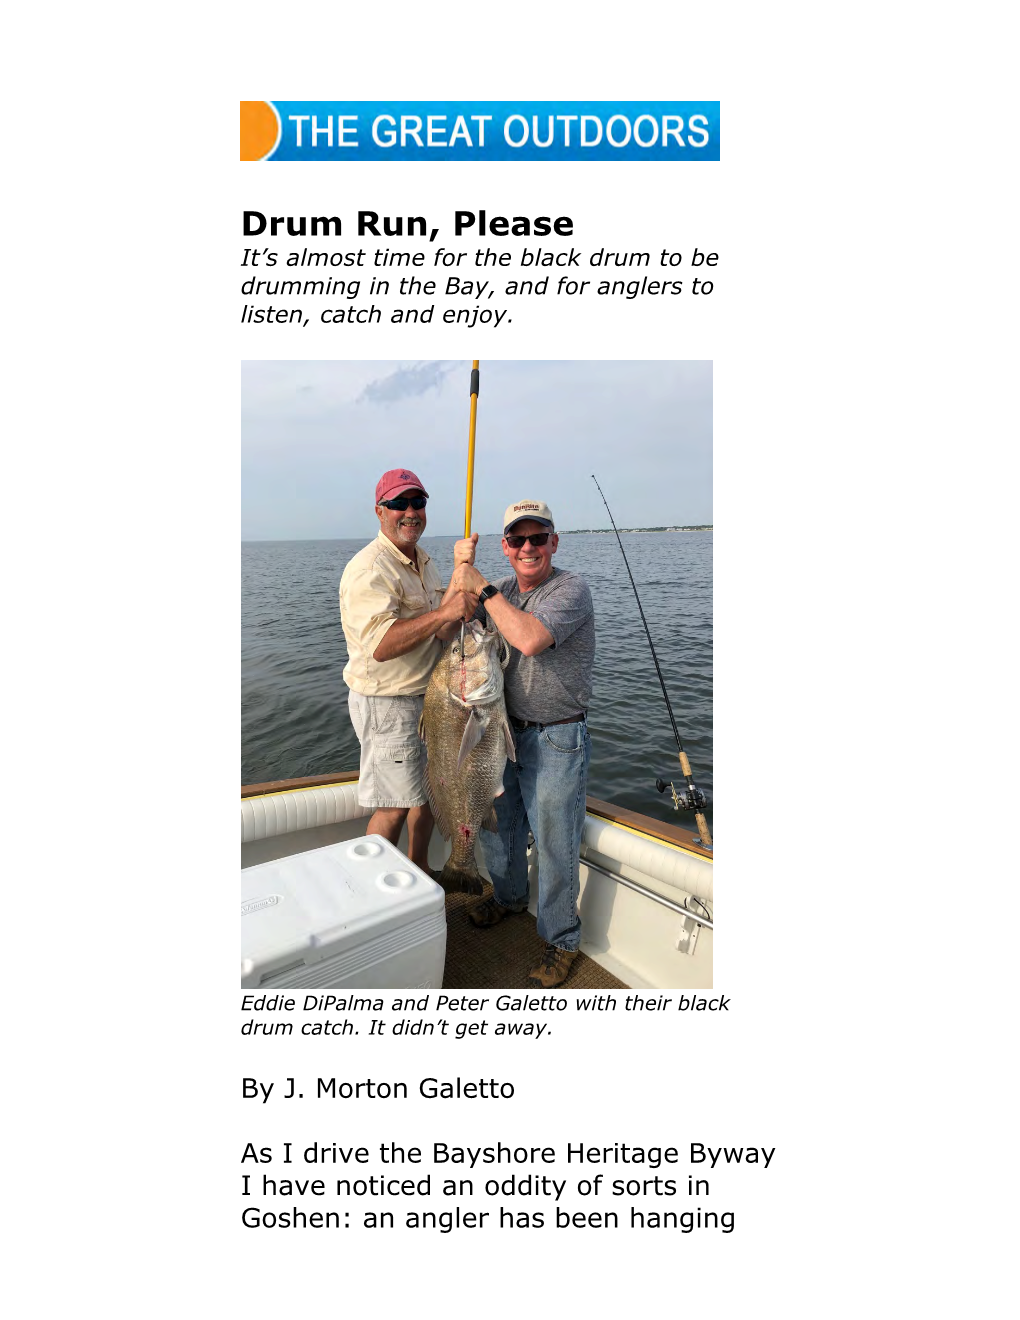 Drum Run, Please It’S Almost Time for the Black Drum to Be Drumming in the Bay, and for Anglers to Listen, Catch and Enjoy